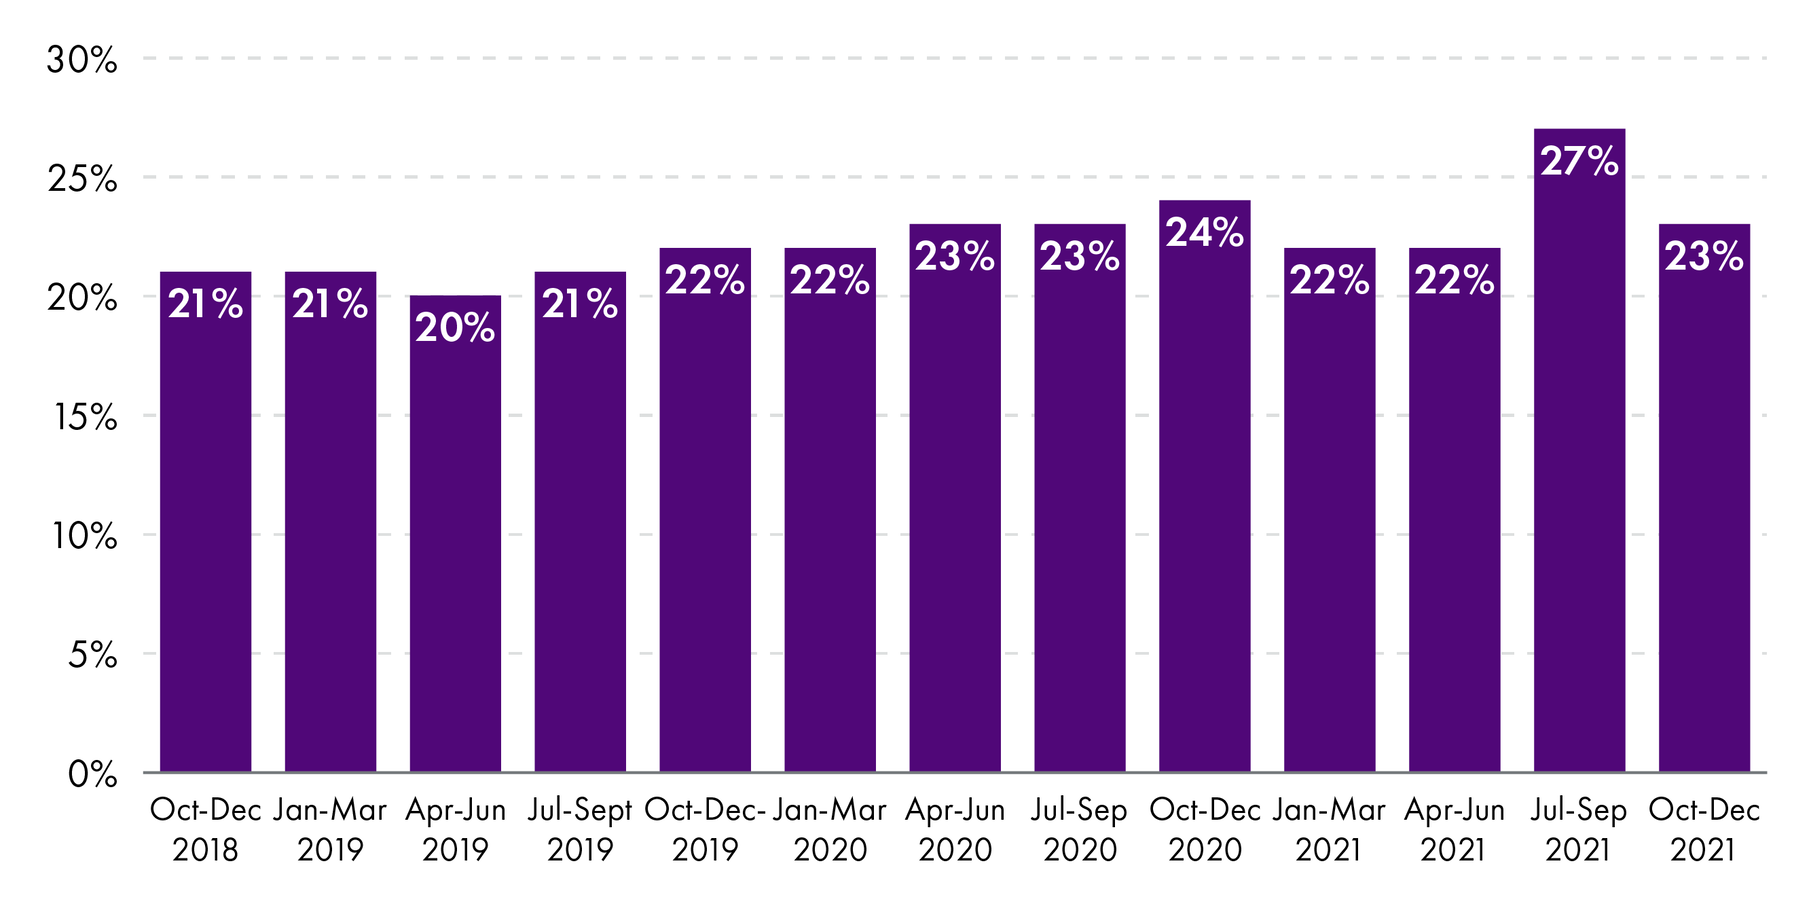 Graph presenting the percentage of referrals to CAMHS that were not excepted, from the quarter October-December 2018 until October-December 2018. Figures are provided in the description.